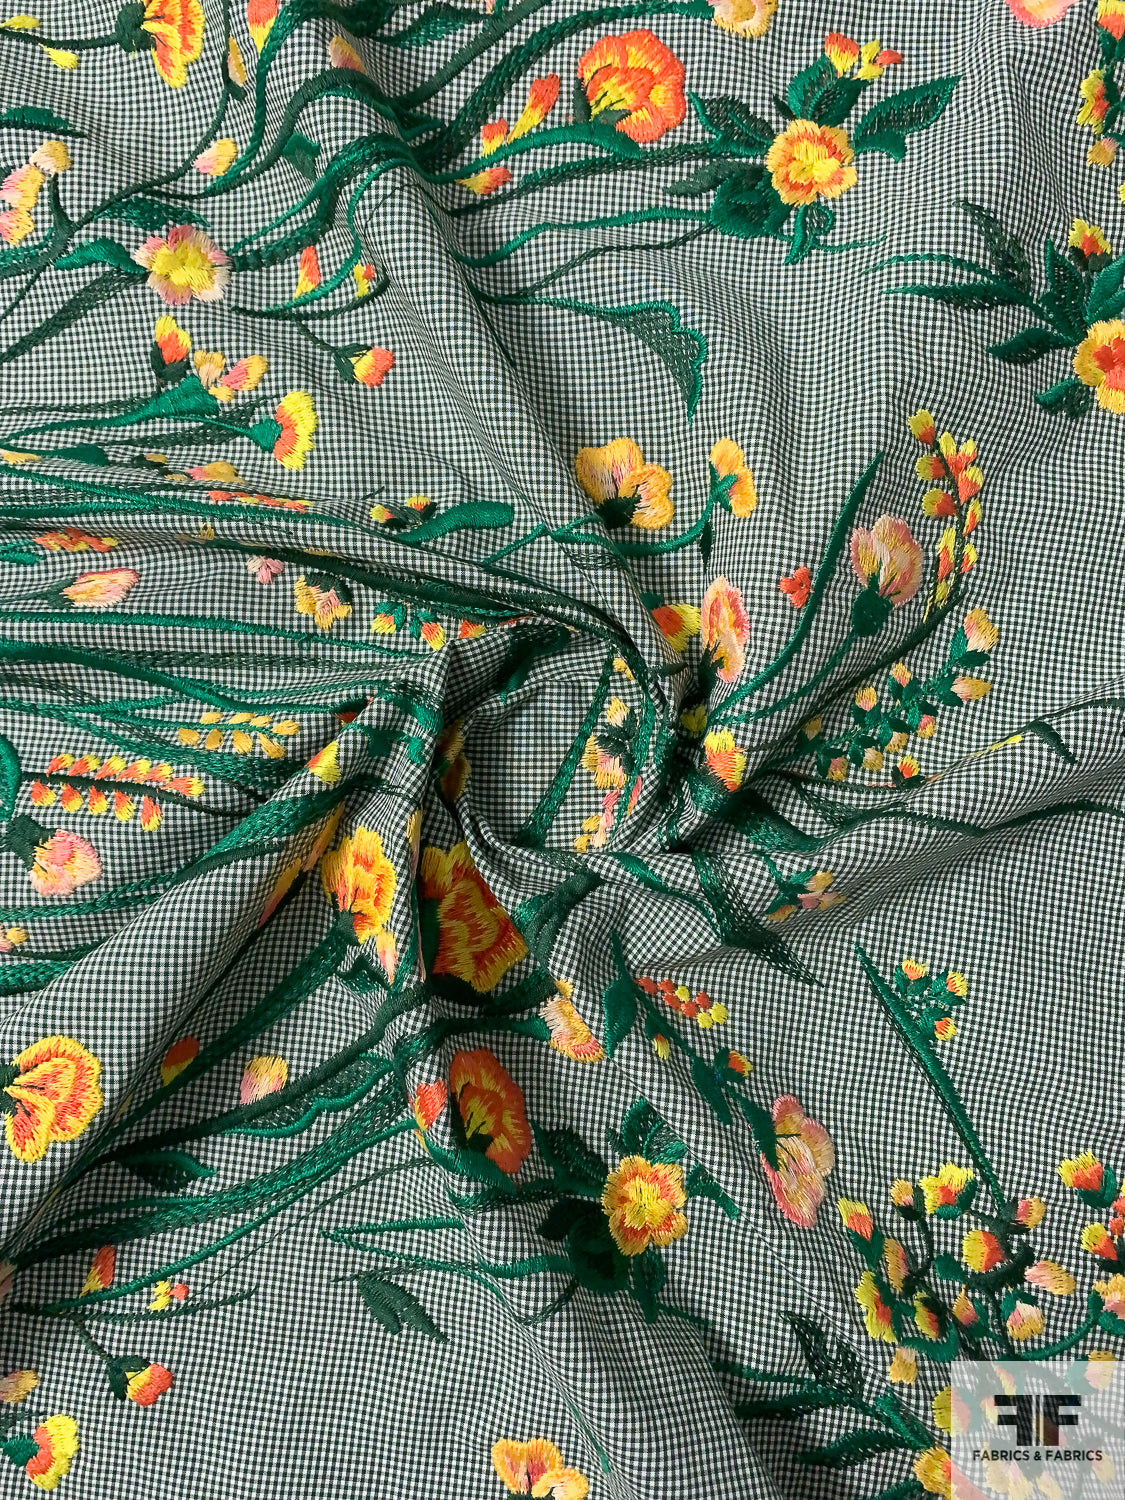 Border Pattern Embroidered Floral Stalks on Mini Gingham Cotton Shirting - Rich Green / Summer Yellow / Orange / White